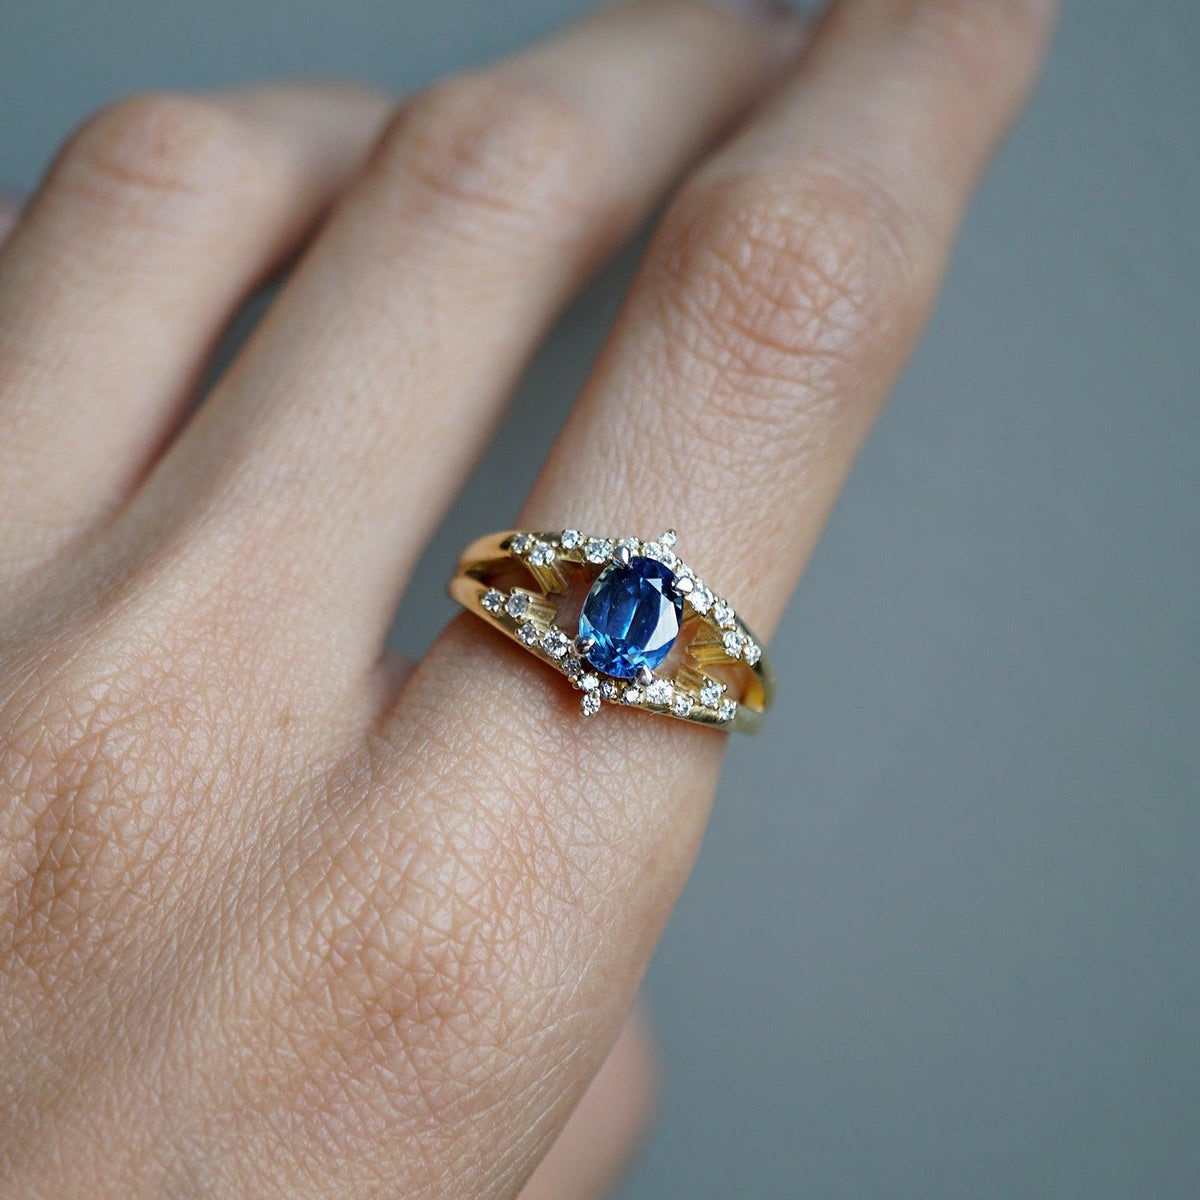 Celestial Blue Sapphire Diamond Ring in 14K and 18K Gold - Tippy Taste Jewelry